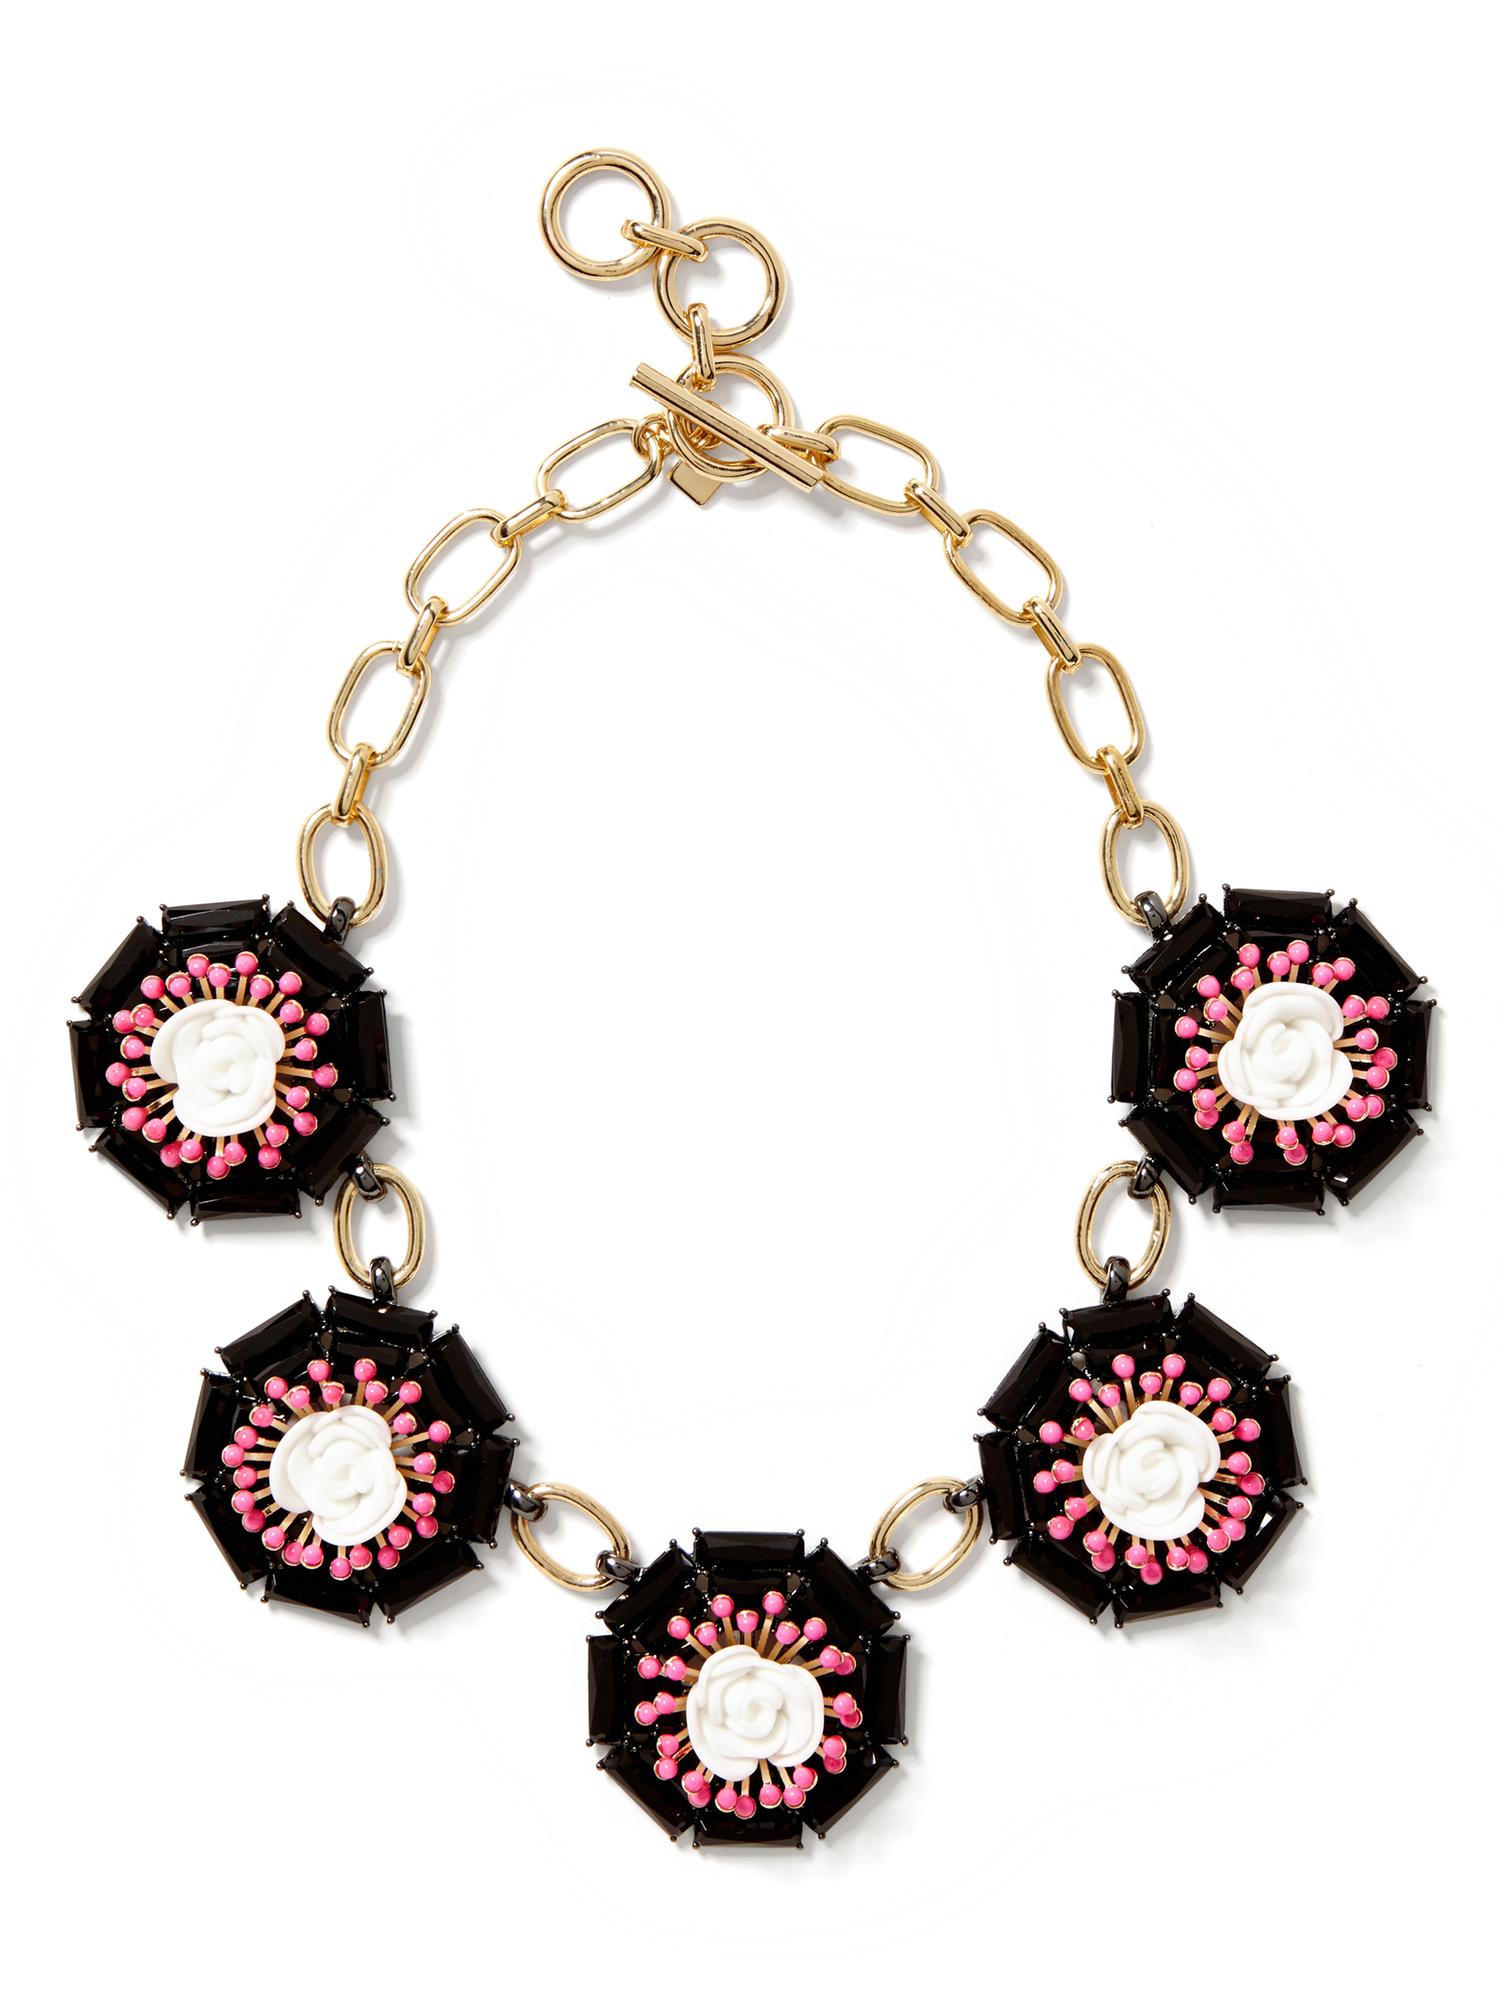 Neo Floral Statement Necklace